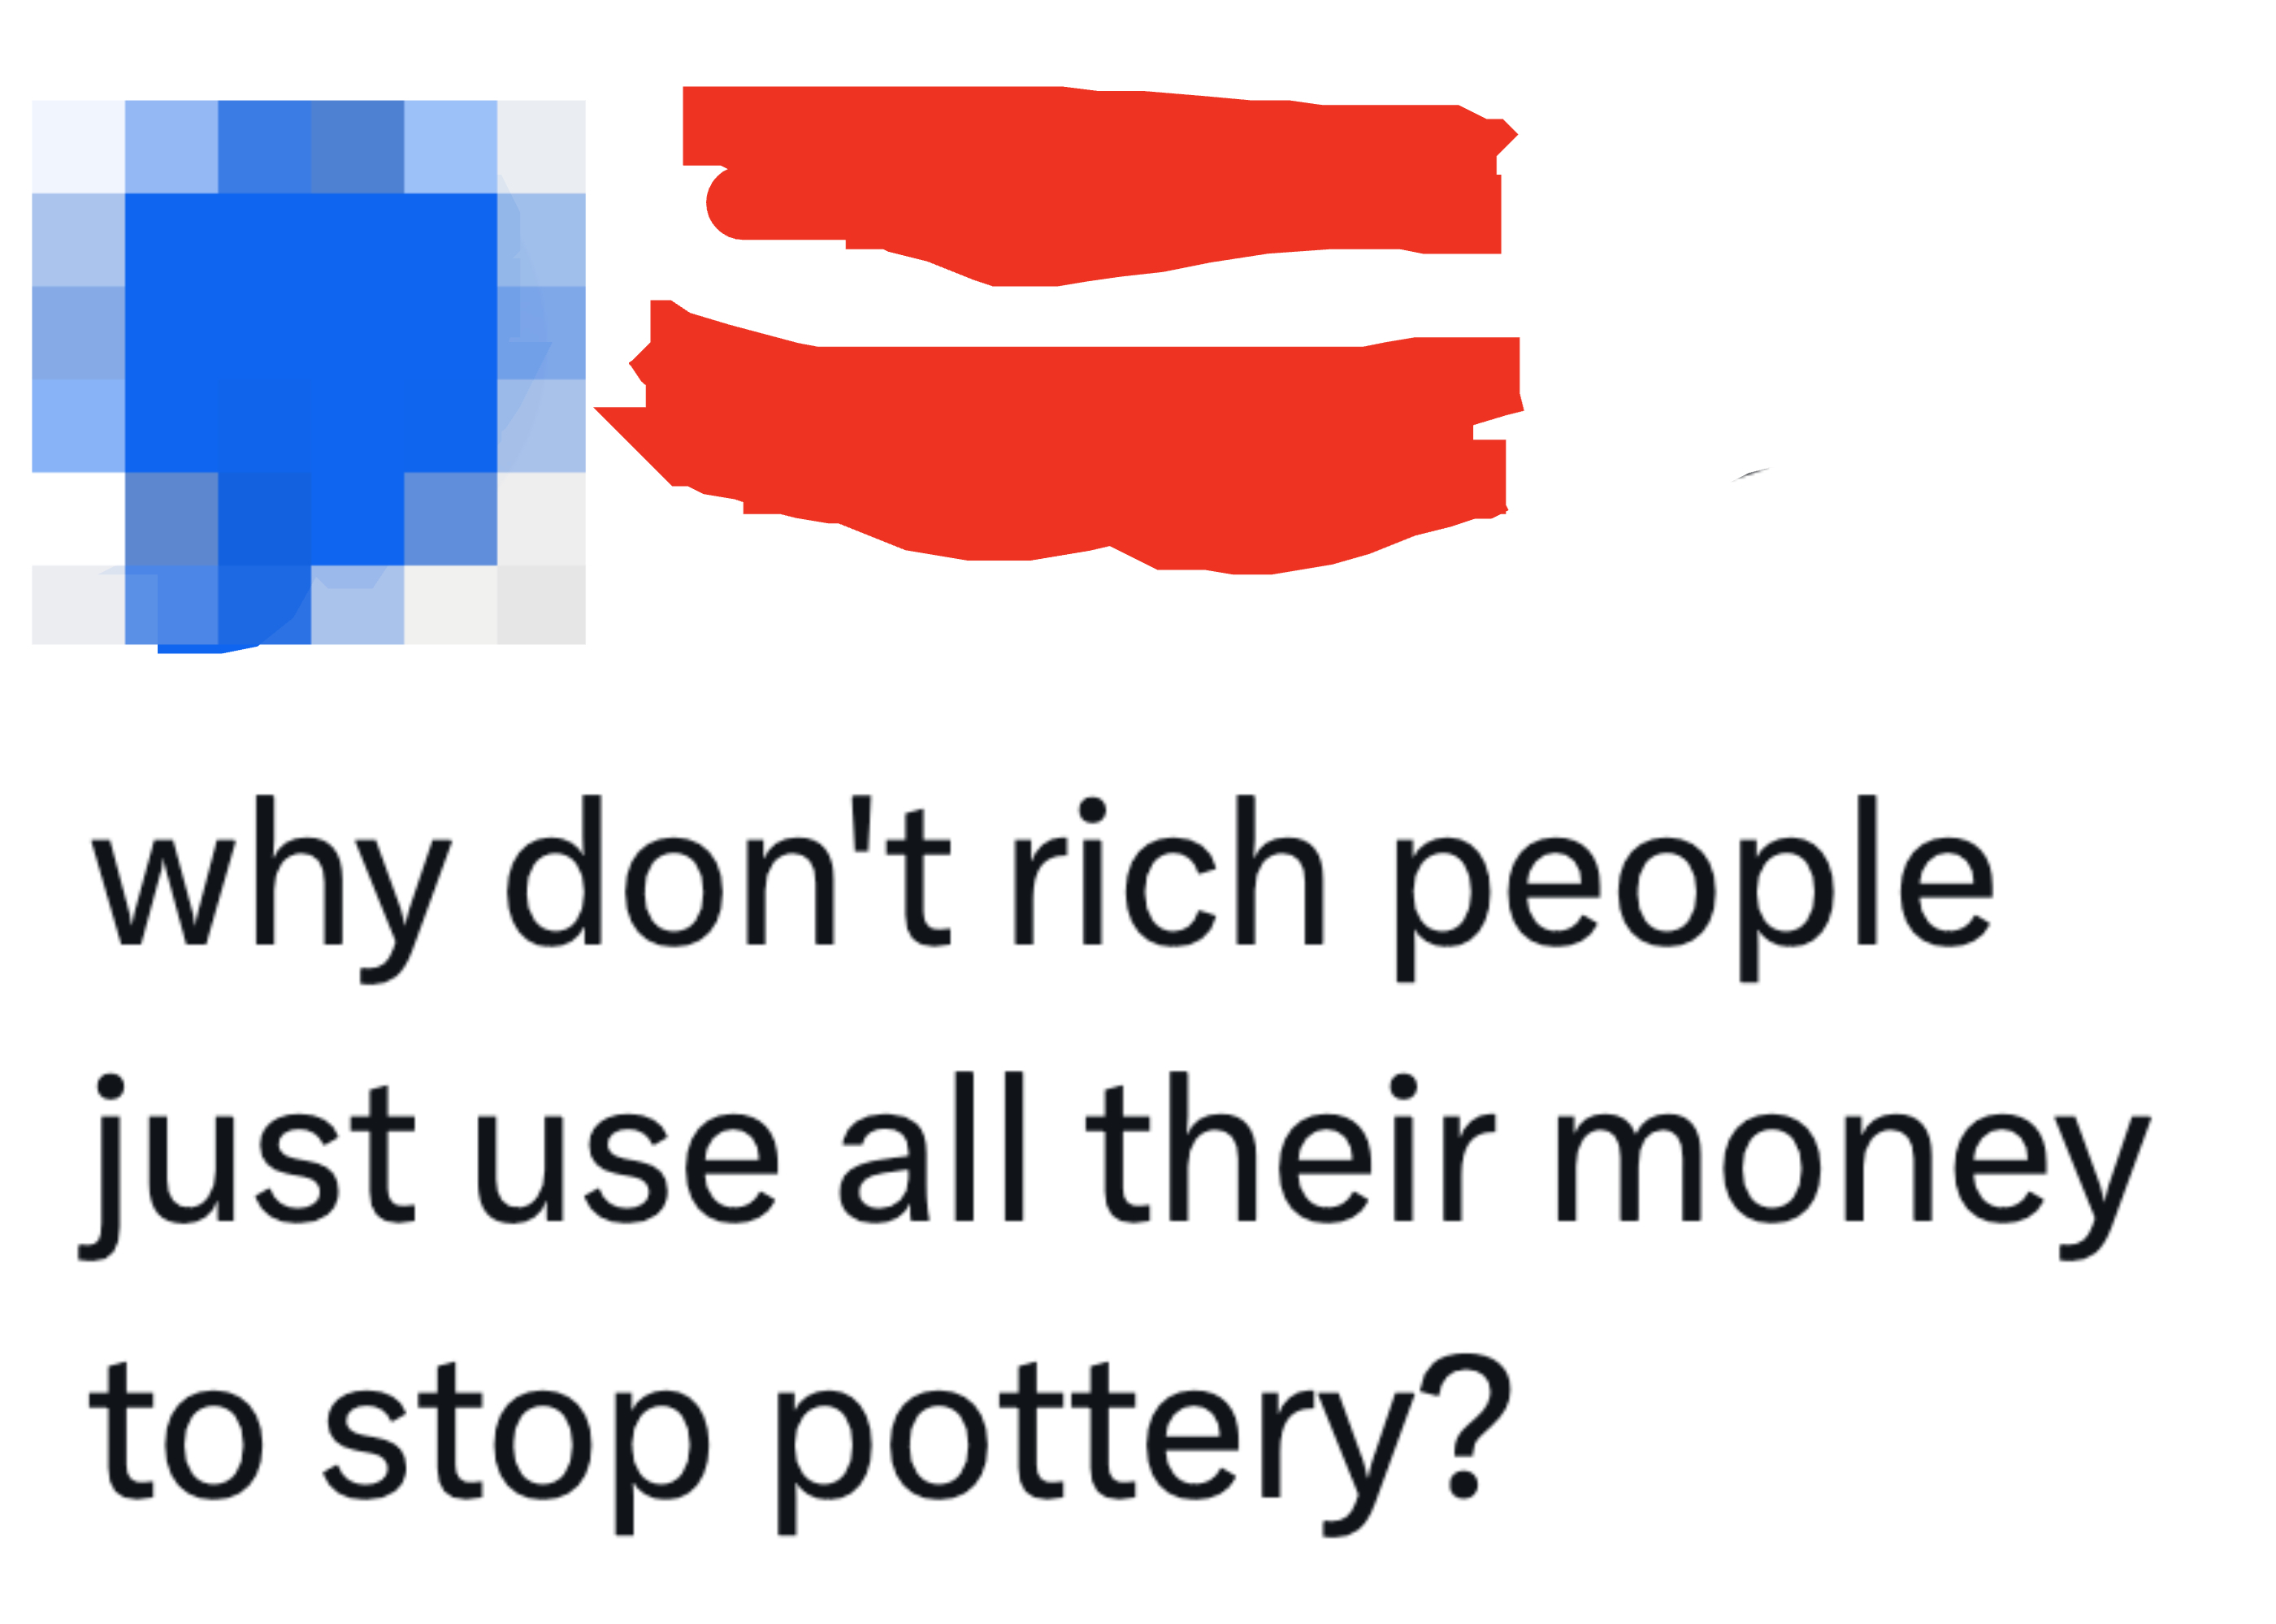 &quot;Why don&#x27;t rich people just use all their money to stop pottery?&quot;